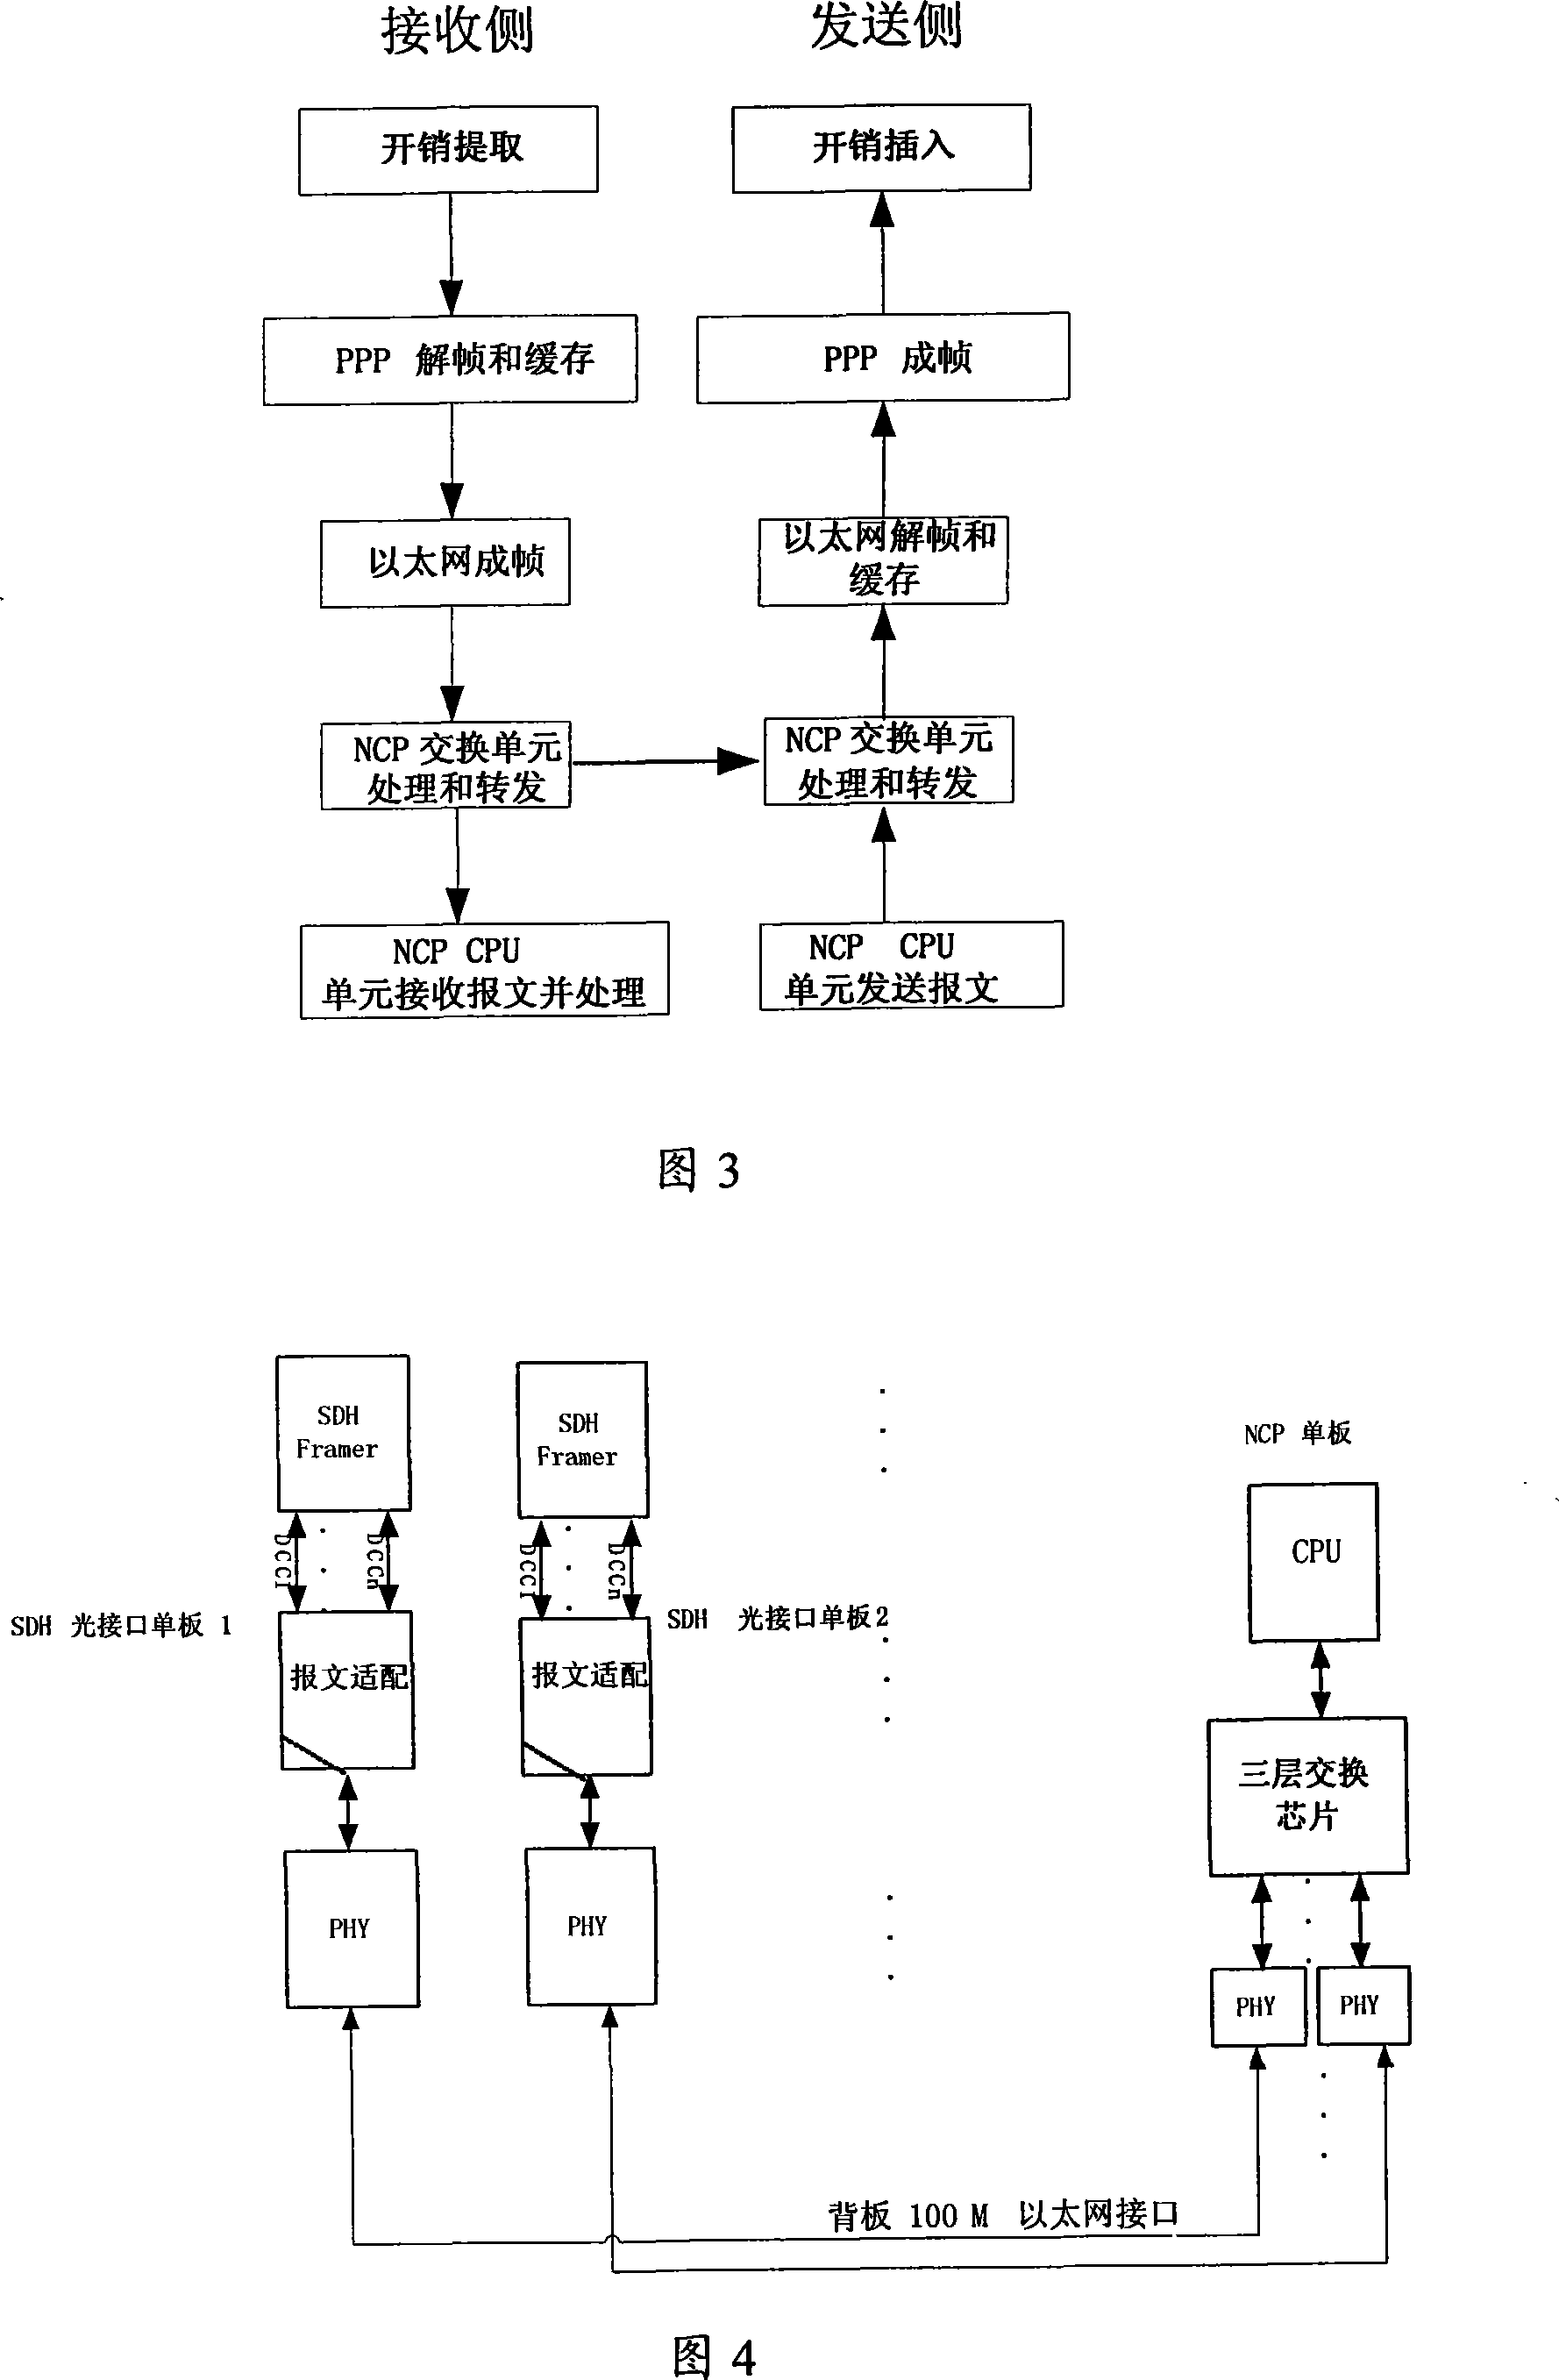 A device and method for realizing signaling communication network and network communication network channel